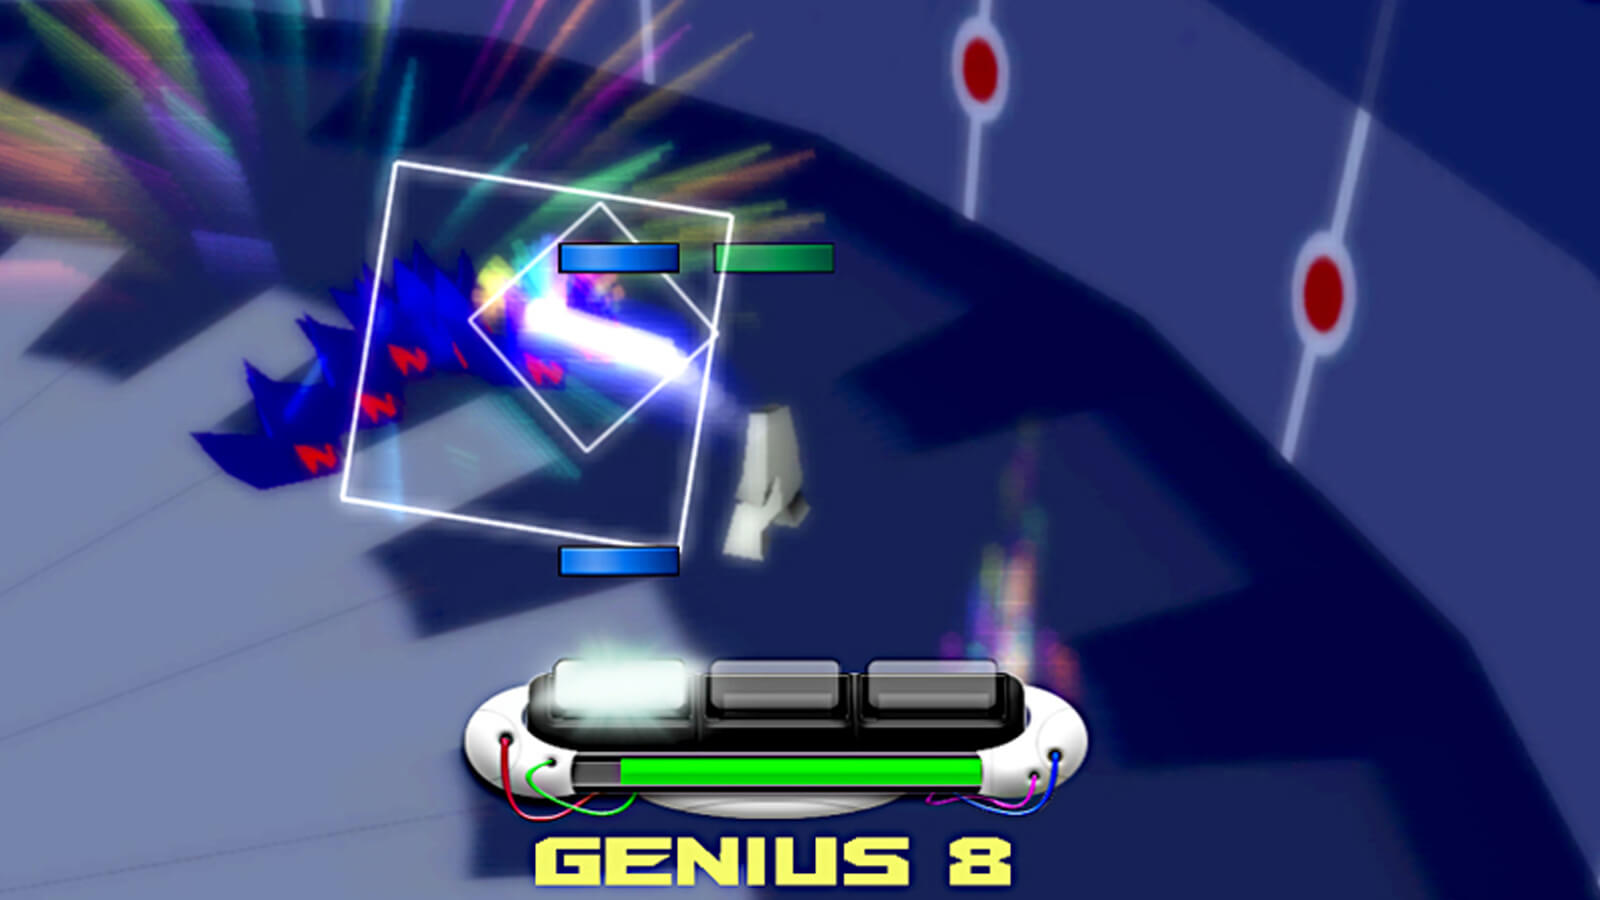 Two blue dashes and a green dash fall towards a console with the word "GENIUS 8" below it.